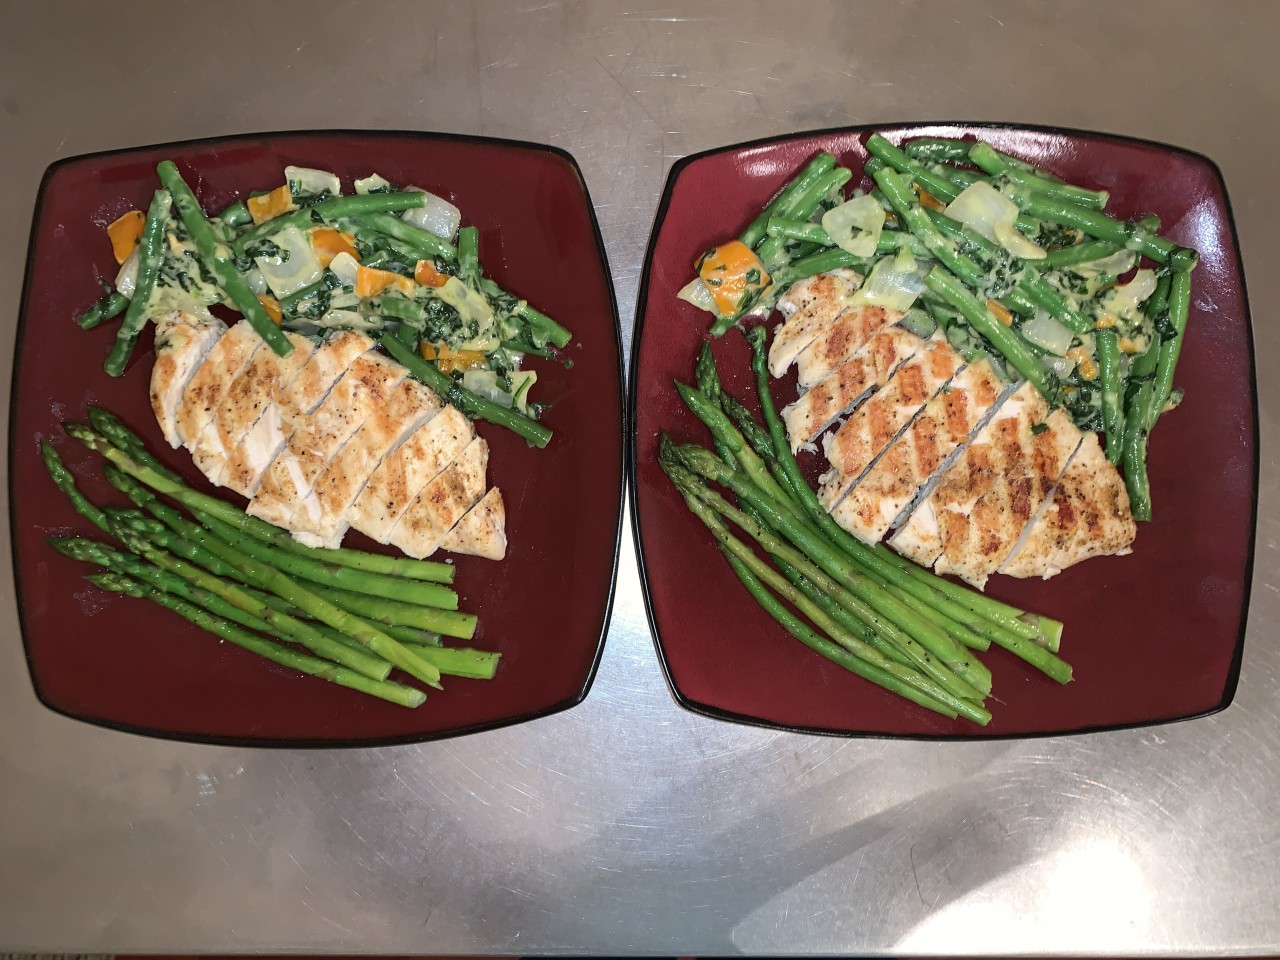 <a class="bx-tag" rel="tag" href="https://streetloc.com/view-channel-profile/whatsfordinner"><s>#</s><b>whatsfordinner</b></a> Grilled Chicken, Asparagus, and Parmesan Green Bean with Onion and Bell Pepper